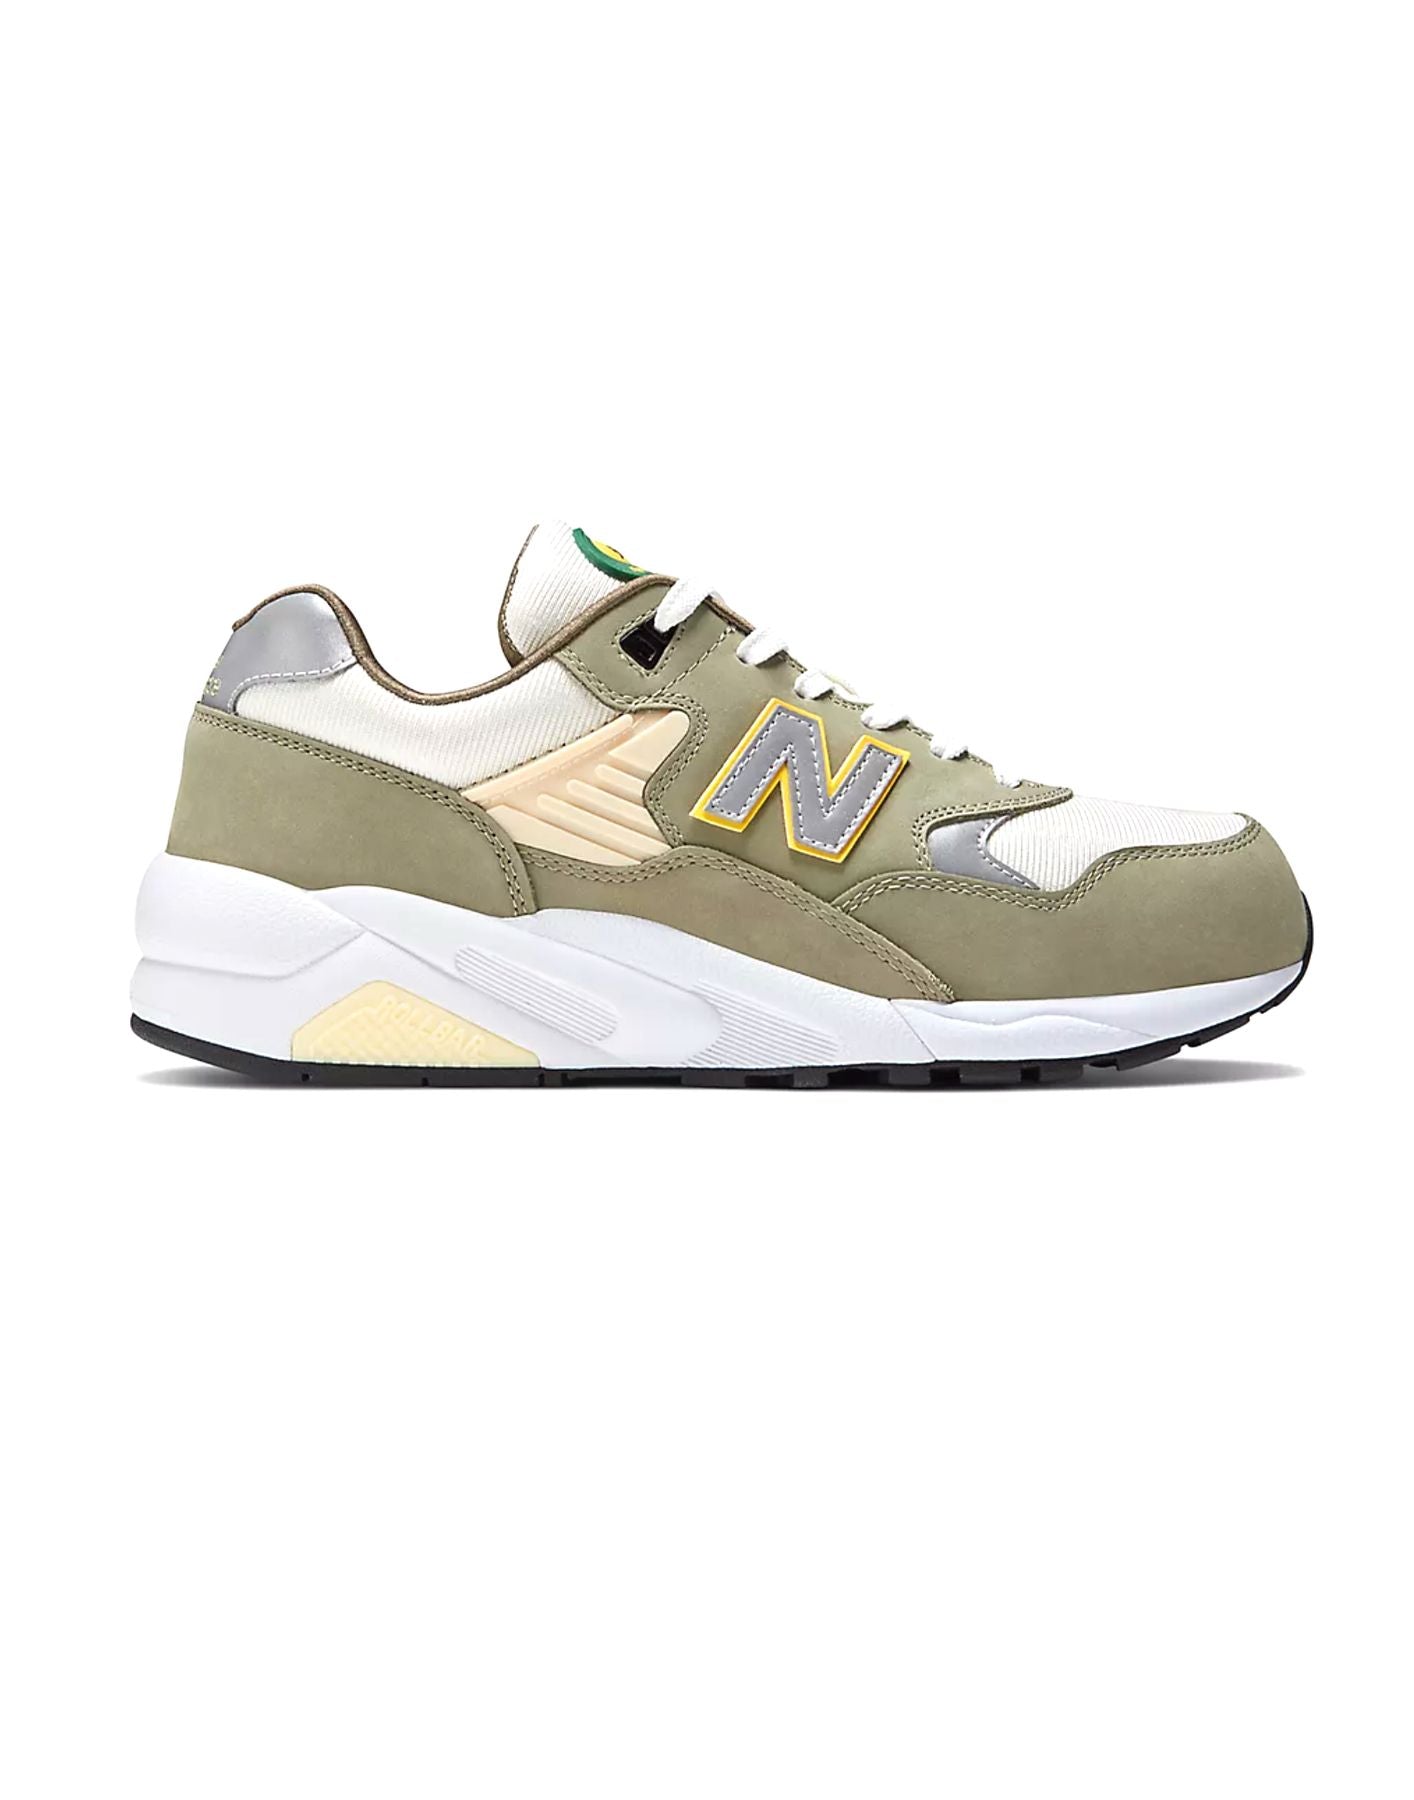 Shoes for man MT580AC2 NEW BALANCE